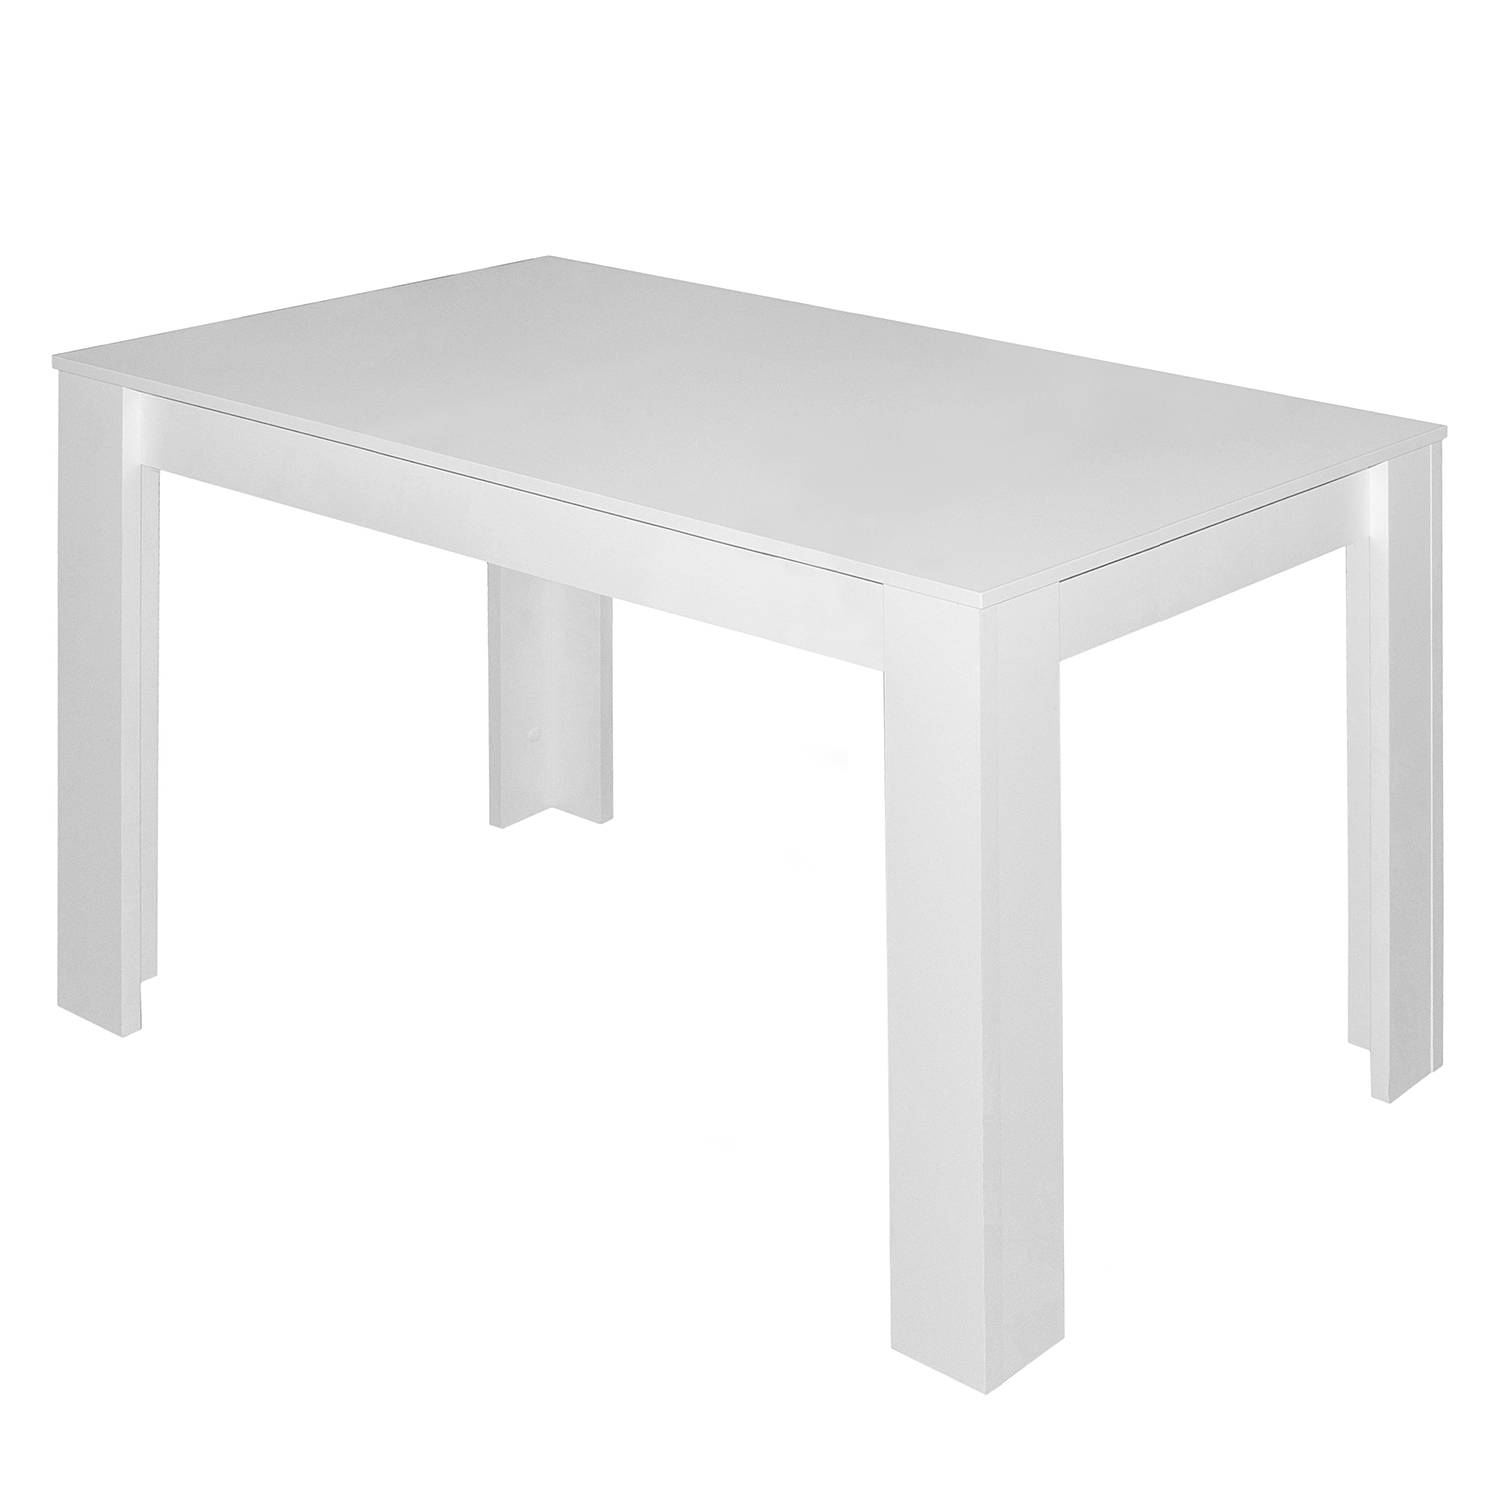 Image of Table Fairford 000000001000121332